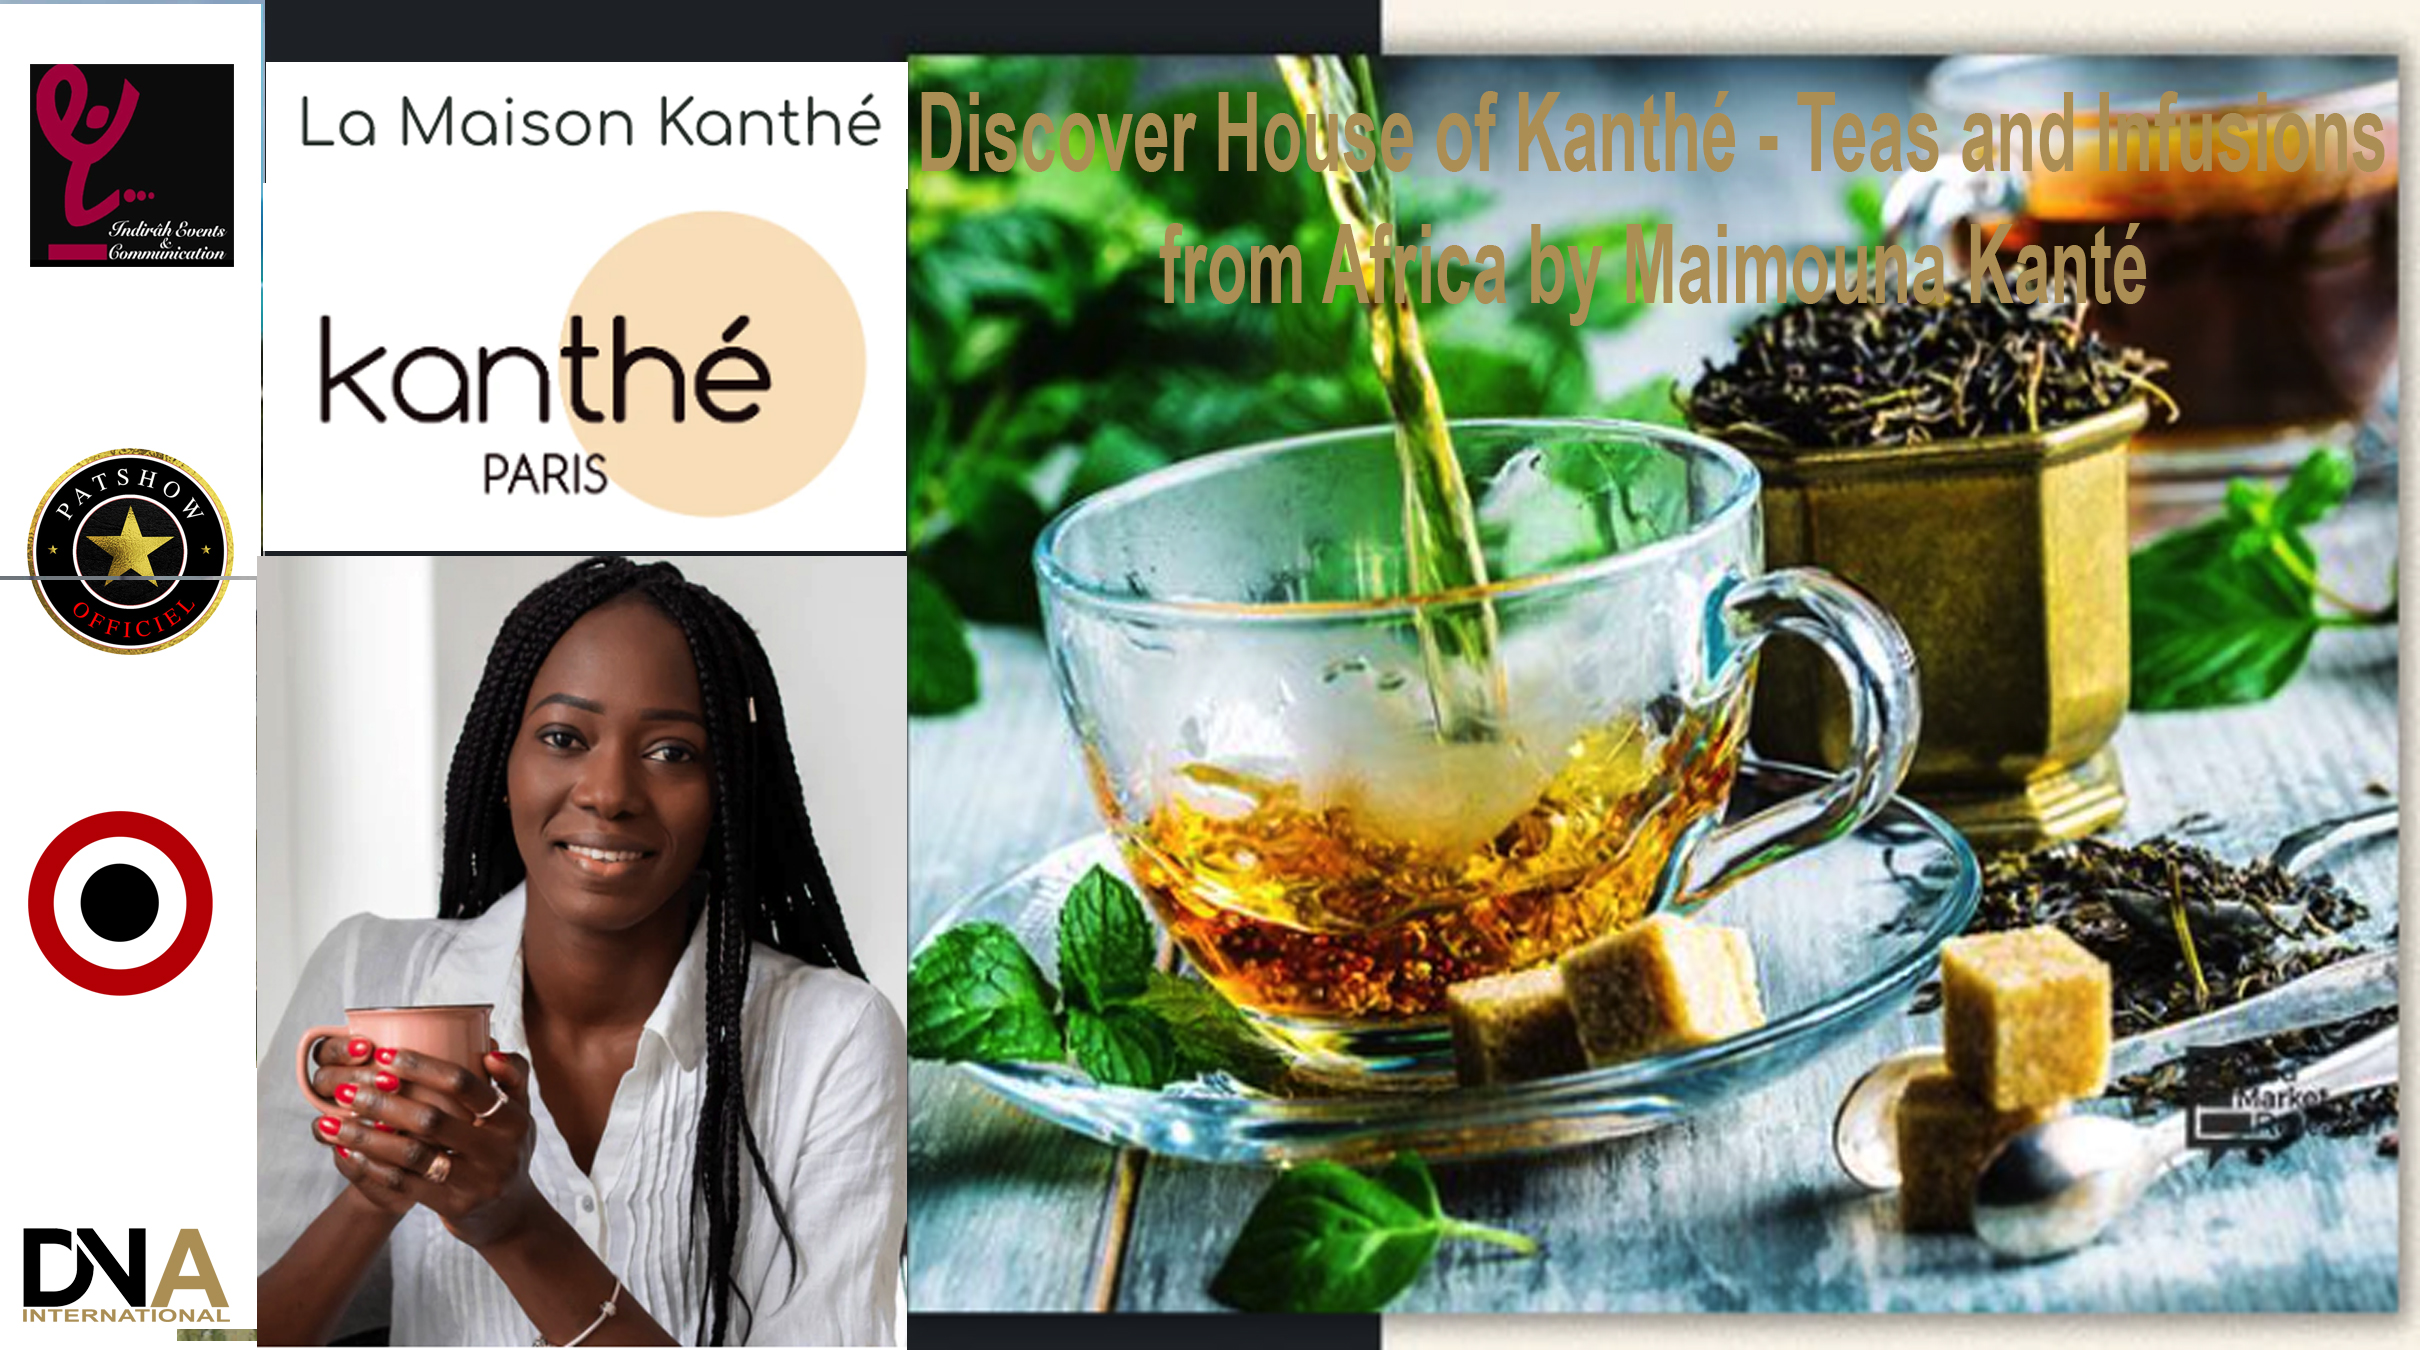 Discover House of Kanthé – Teas and Infusions from Africa by Maimouna Kanté